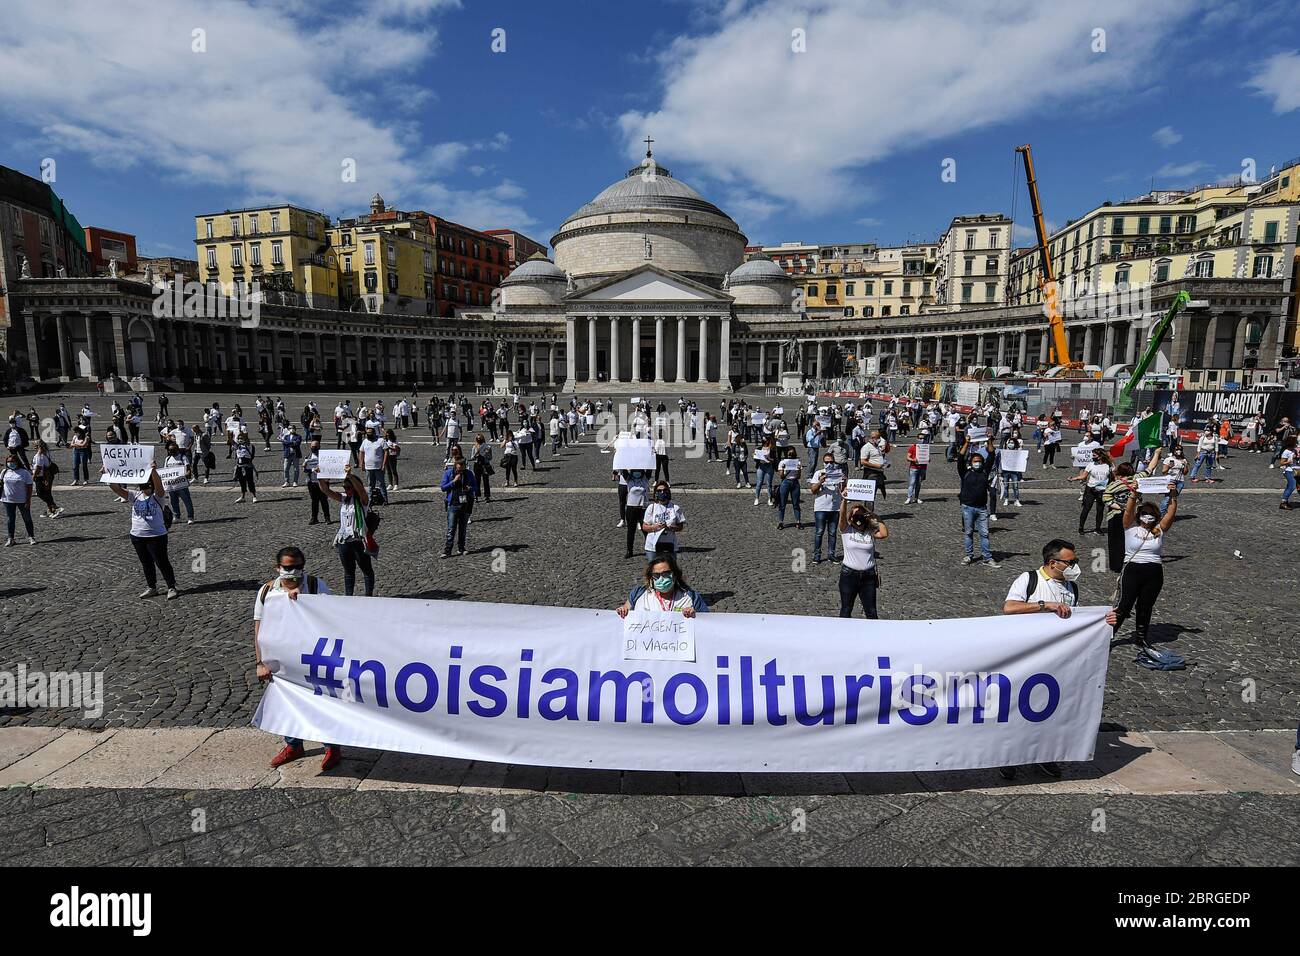 Tour operators take part in a demonstration in Piazza del Plebiscito to protest 'against the indifference of the government and local authorities' on the economic crisis that has been exacerbated by the coronavirus pandemic (COVID-19) in central Naples. Italy is gradually easing the blockade measures implemented to stem the spread of the SARS-CoV-2 coronavirus, which causes COVID-19 disease. Stock Photo